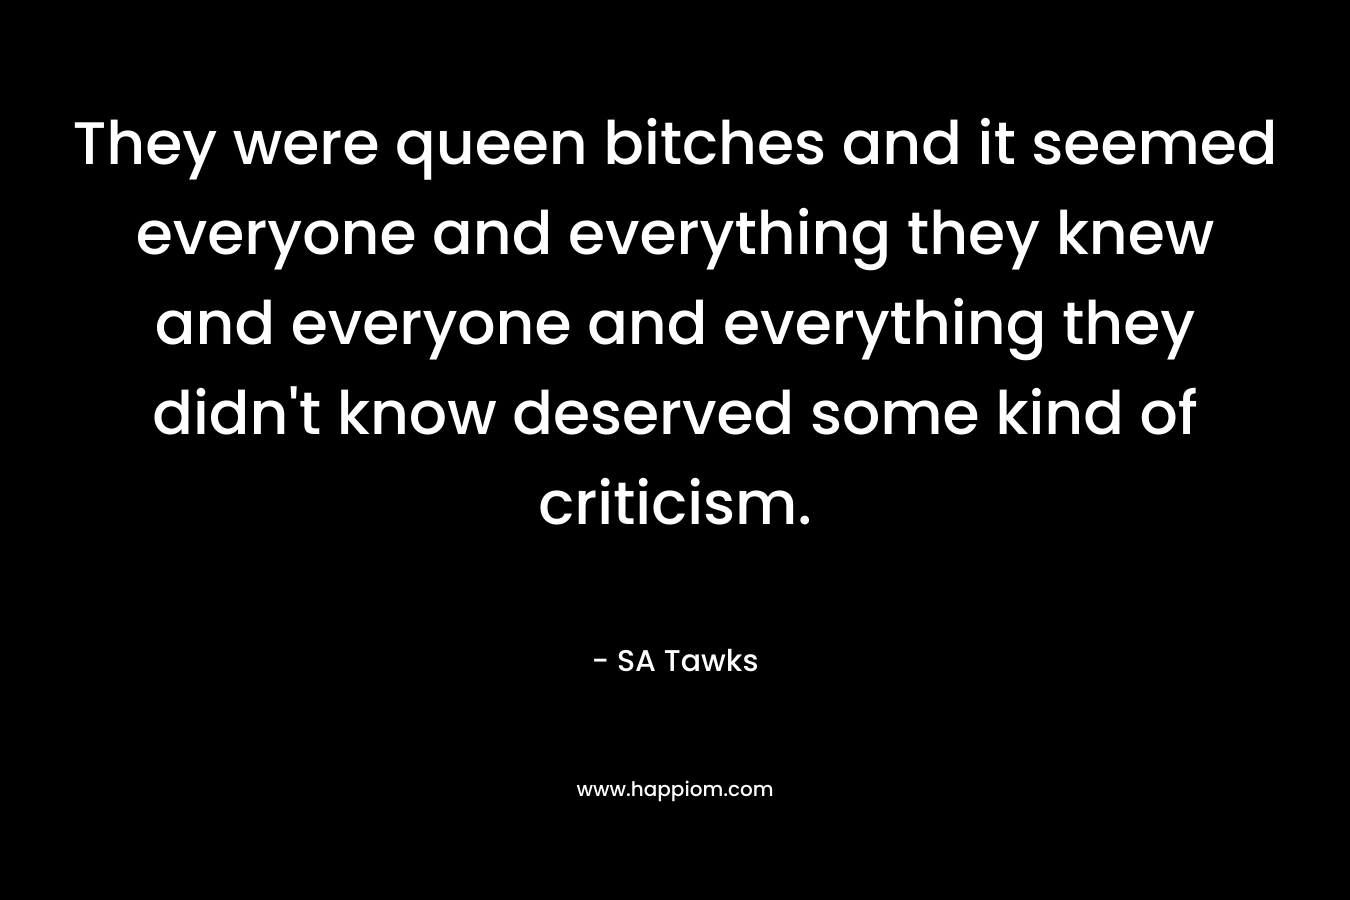 They were queen bitches and it seemed everyone and everything they knew and everyone and everything they didn’t know deserved some kind of criticism. – SA Tawks